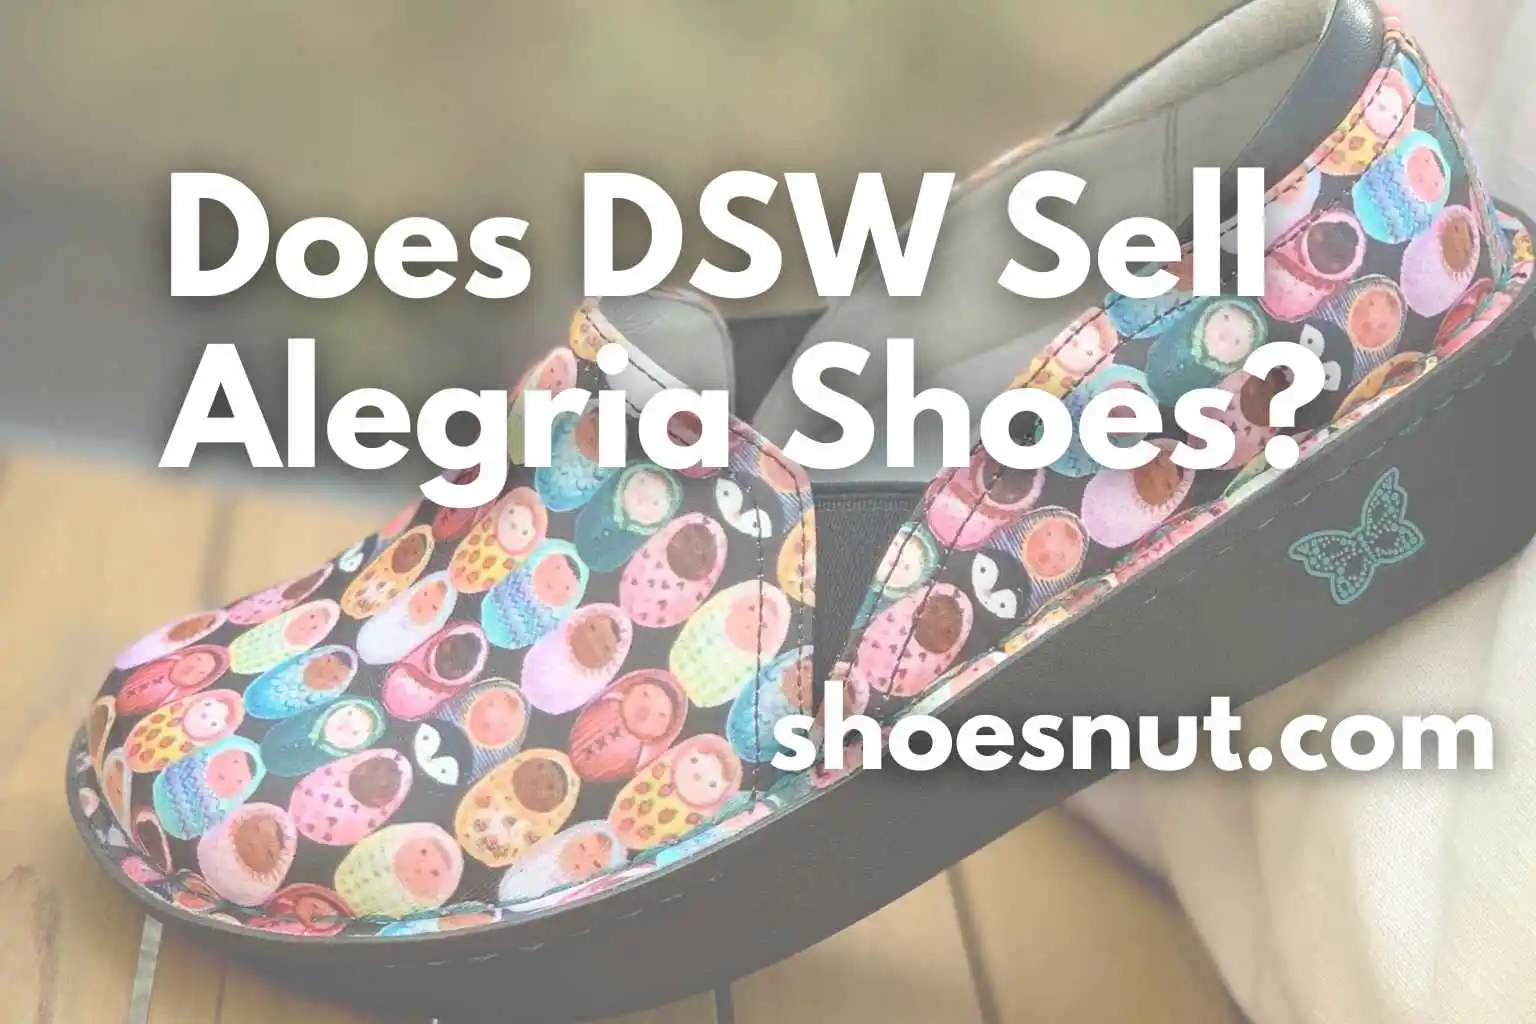 Does DSW Sell Alegria Shoes?